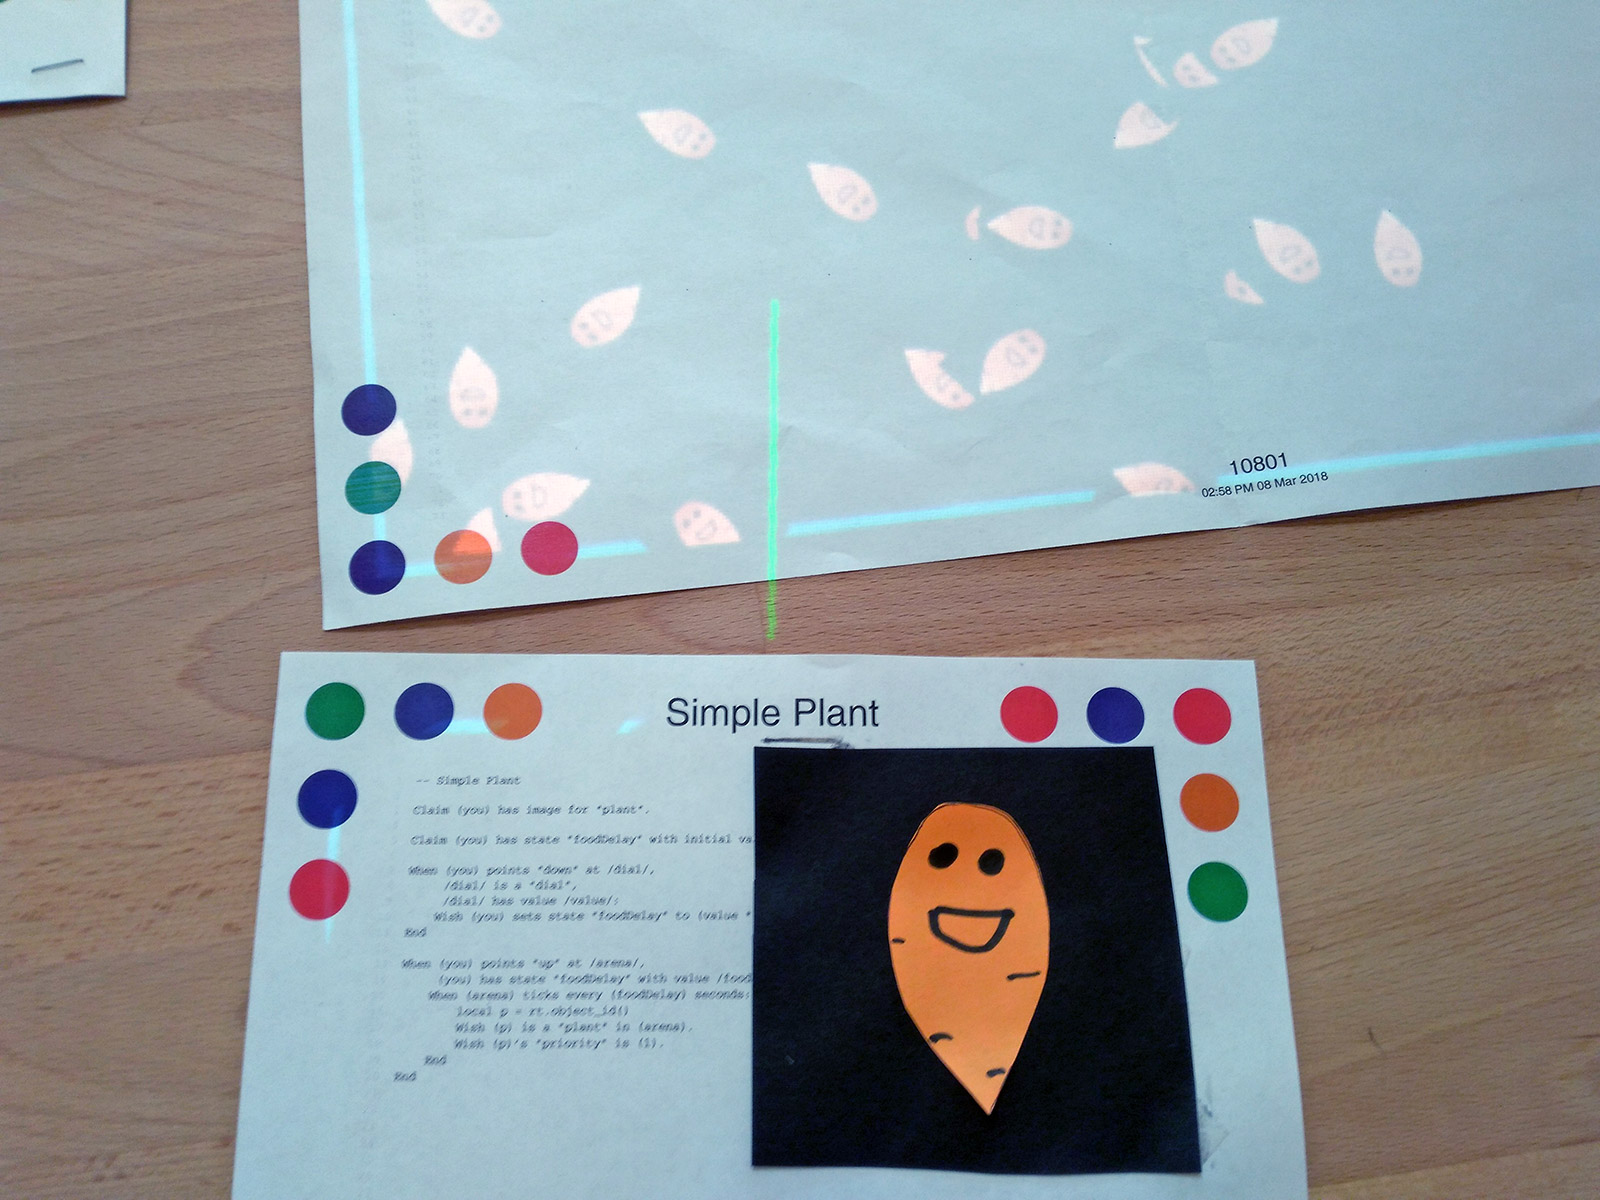 Figure 7. The carrot on the page becomes an agent in the simulation! The image is streamed live from the page and can be changed in real time.